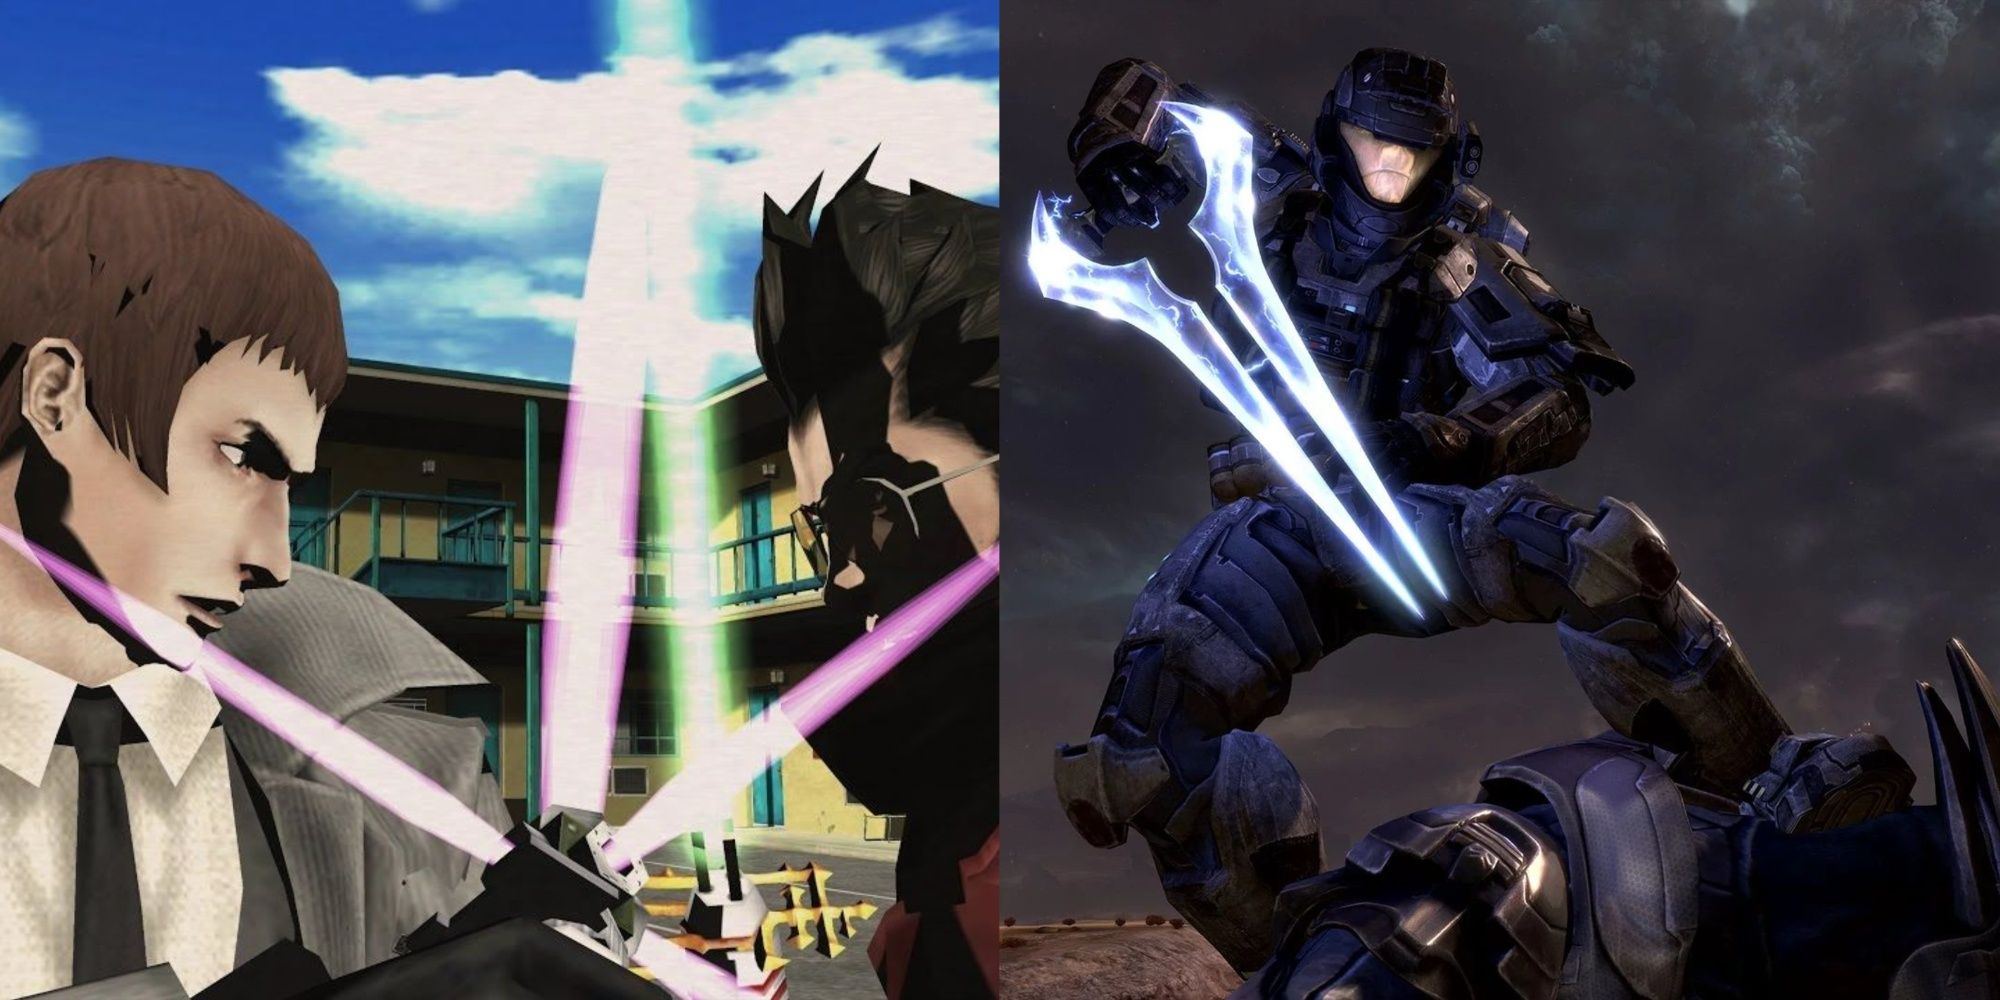 Travis and Henry fighting in No More Heroes 1 and an Energy Sword from Halo.